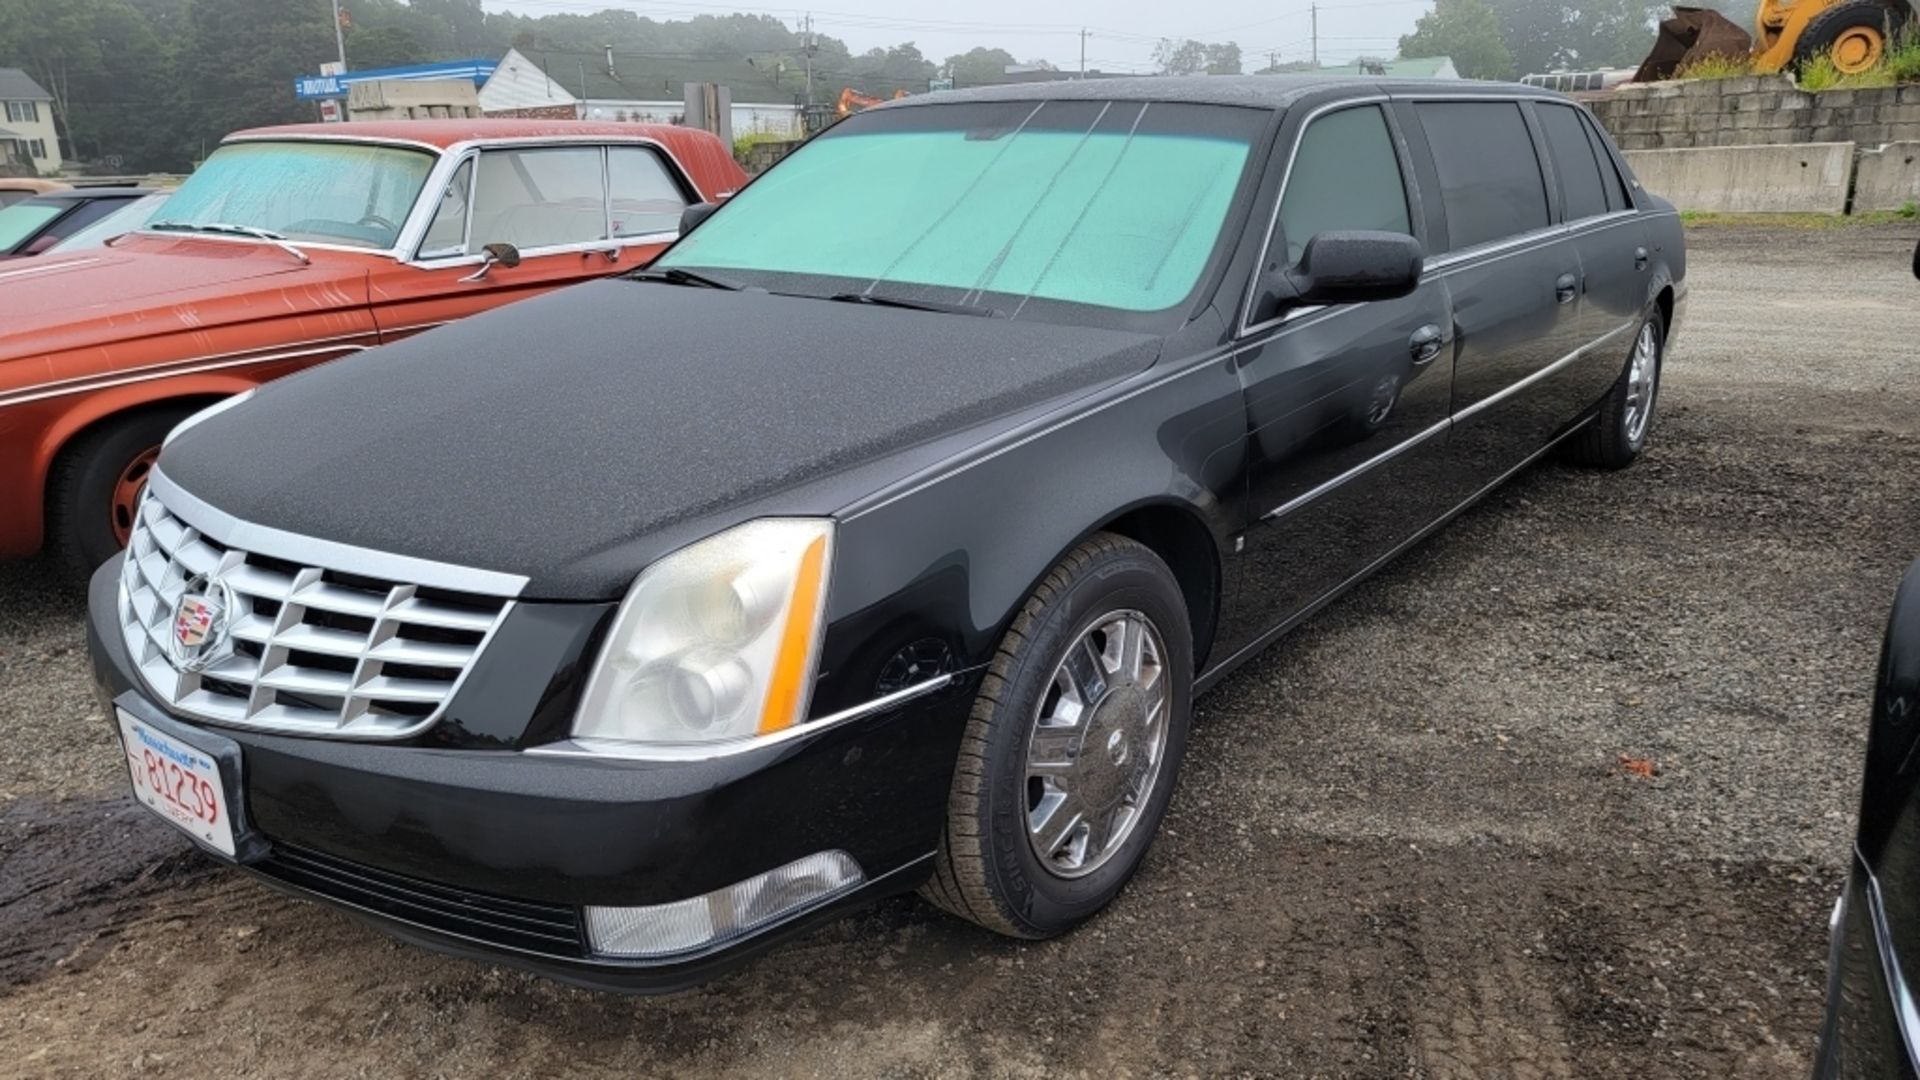 2008 Cadillac DTS Limousine - Image 3 of 9